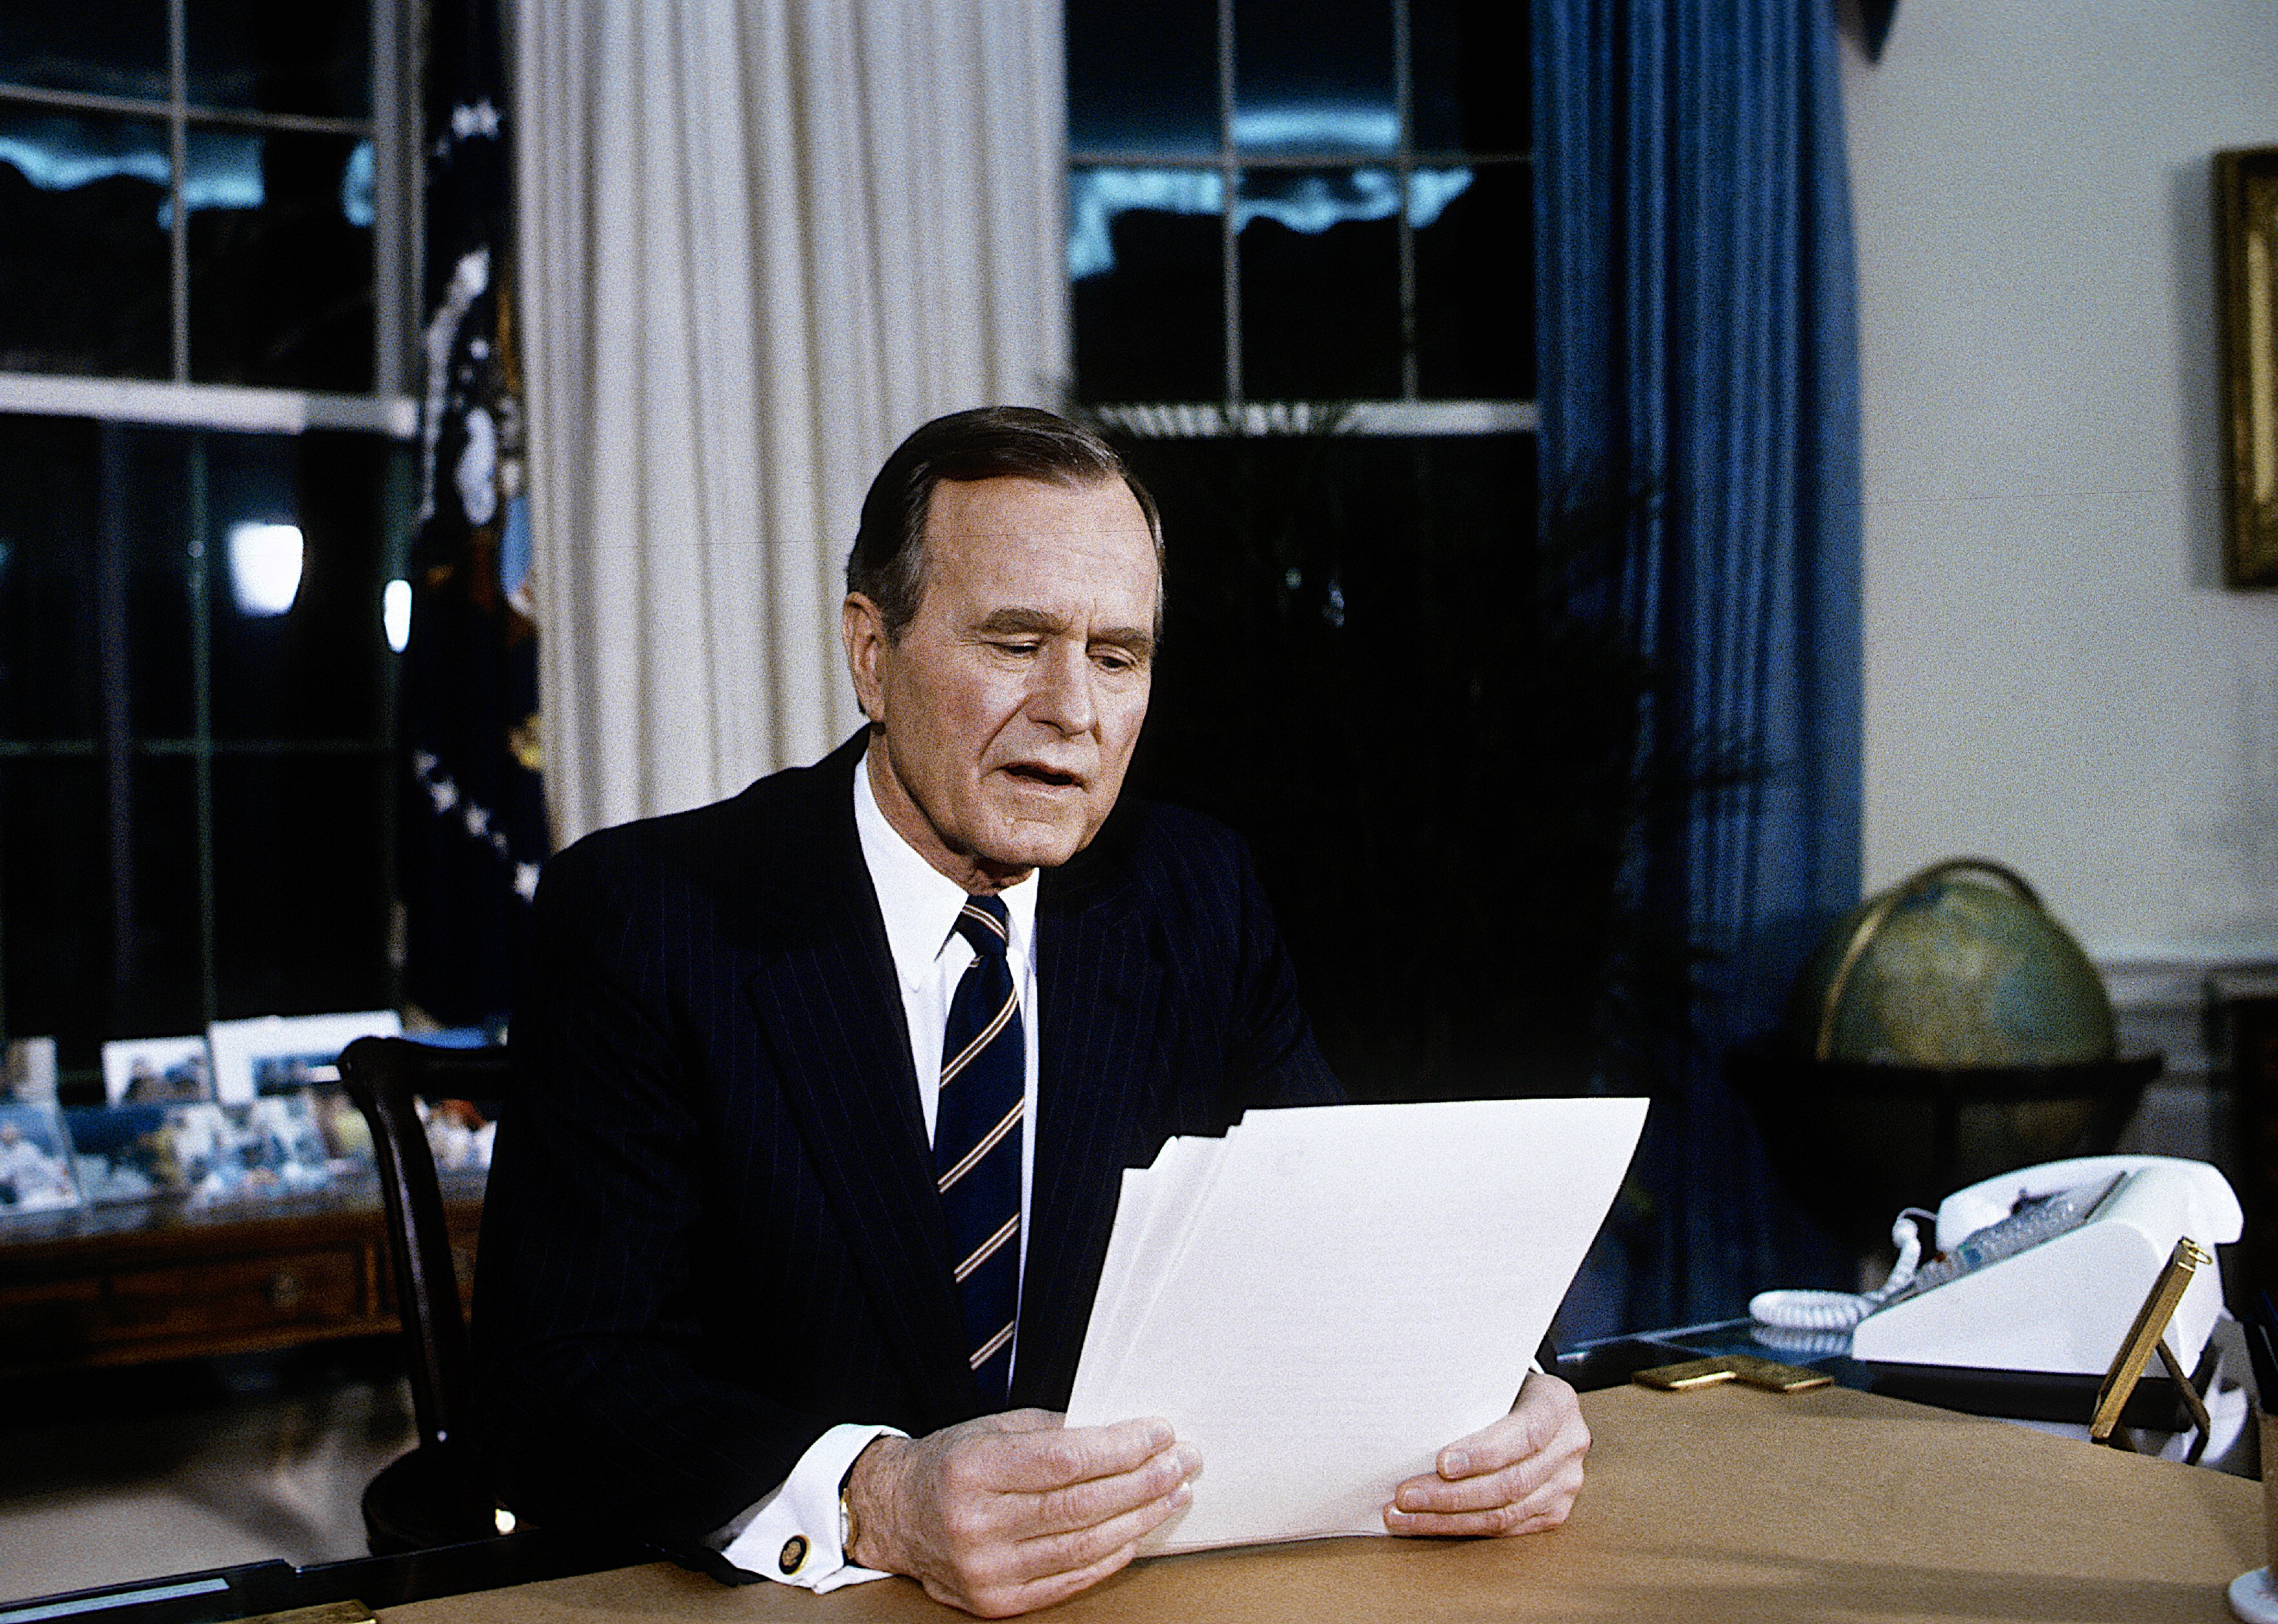 George H.W. Bush gives address to the nation from the oval office.